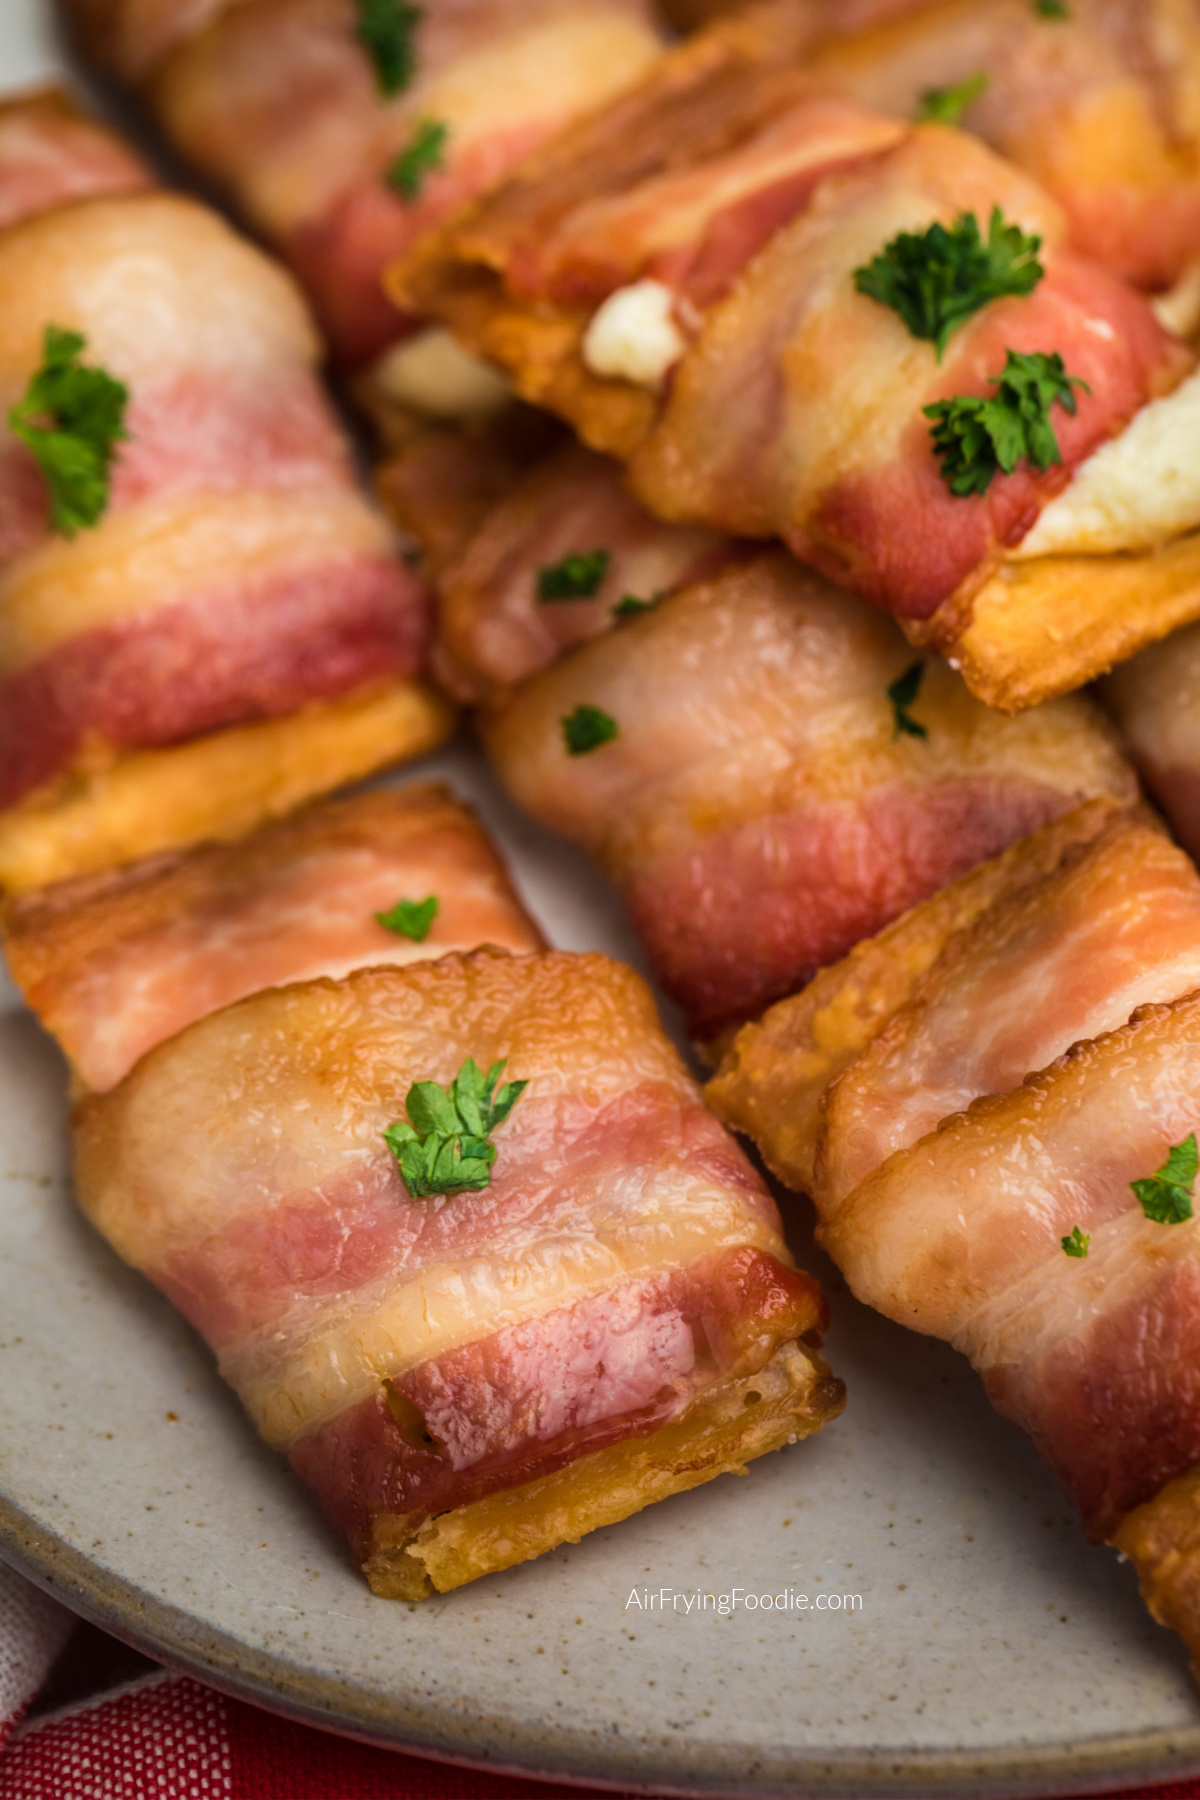 Bacon wrapped cream cheese crackers on a plate, ready to eat.